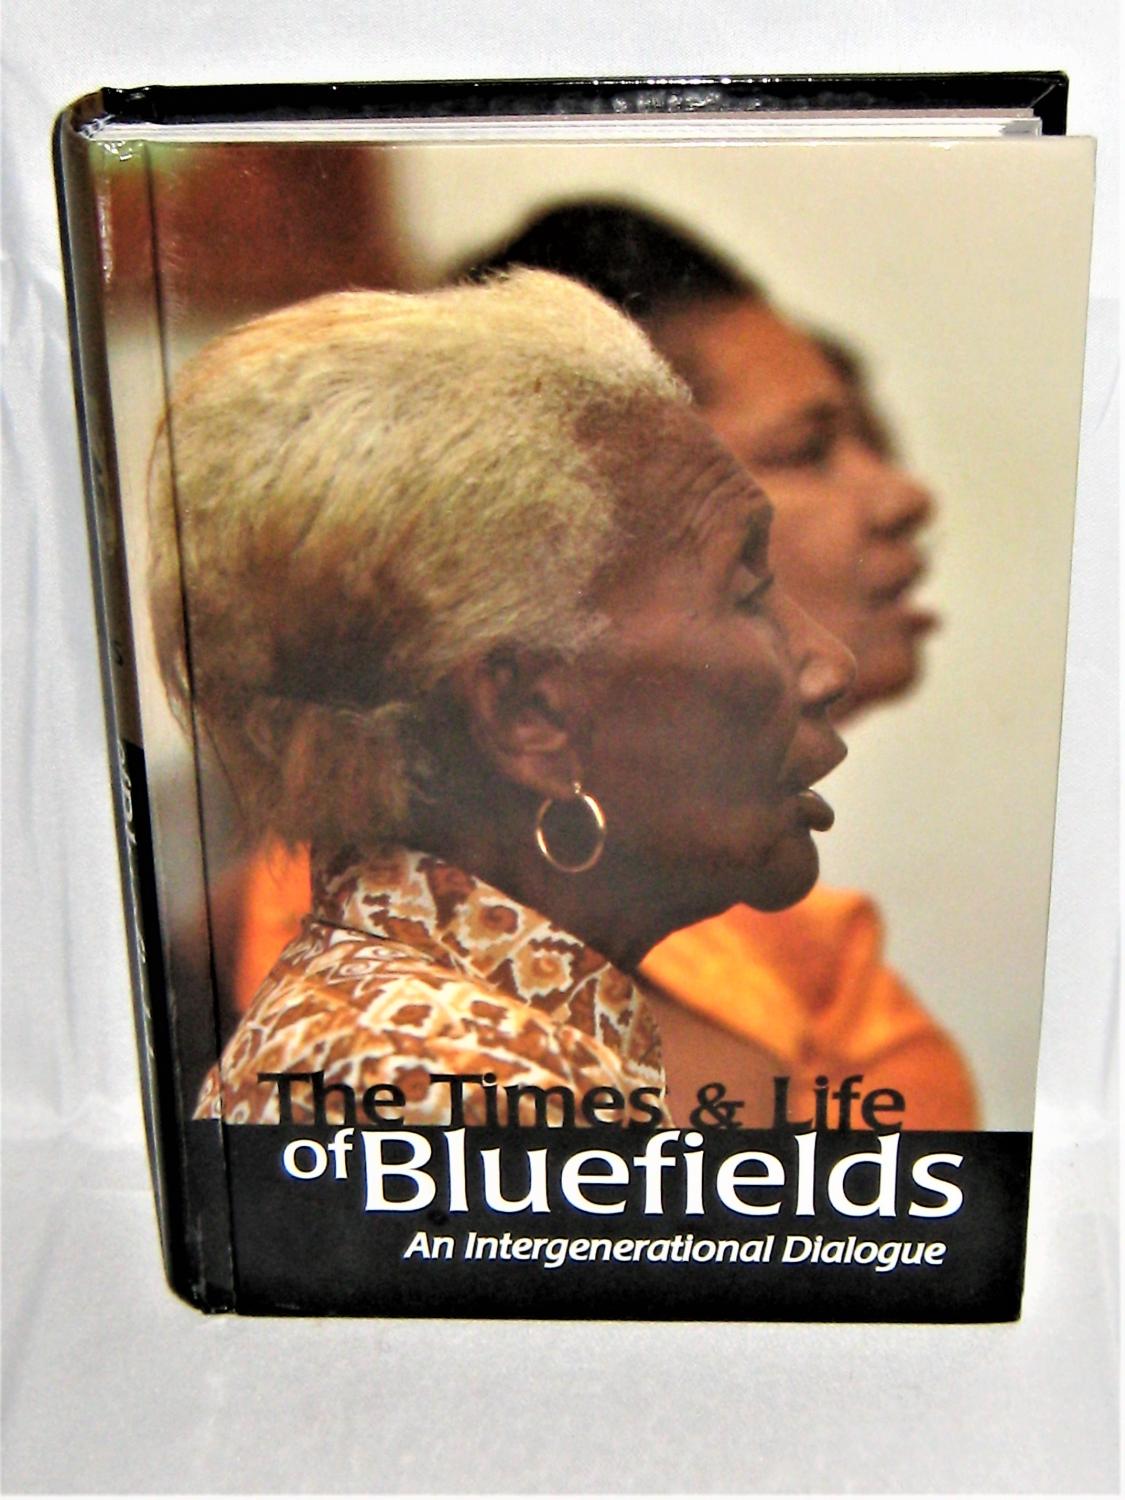 The Times and Life of Bluefields: An Intergenerational Dialogue - Deborah Robb Taylor, Editor